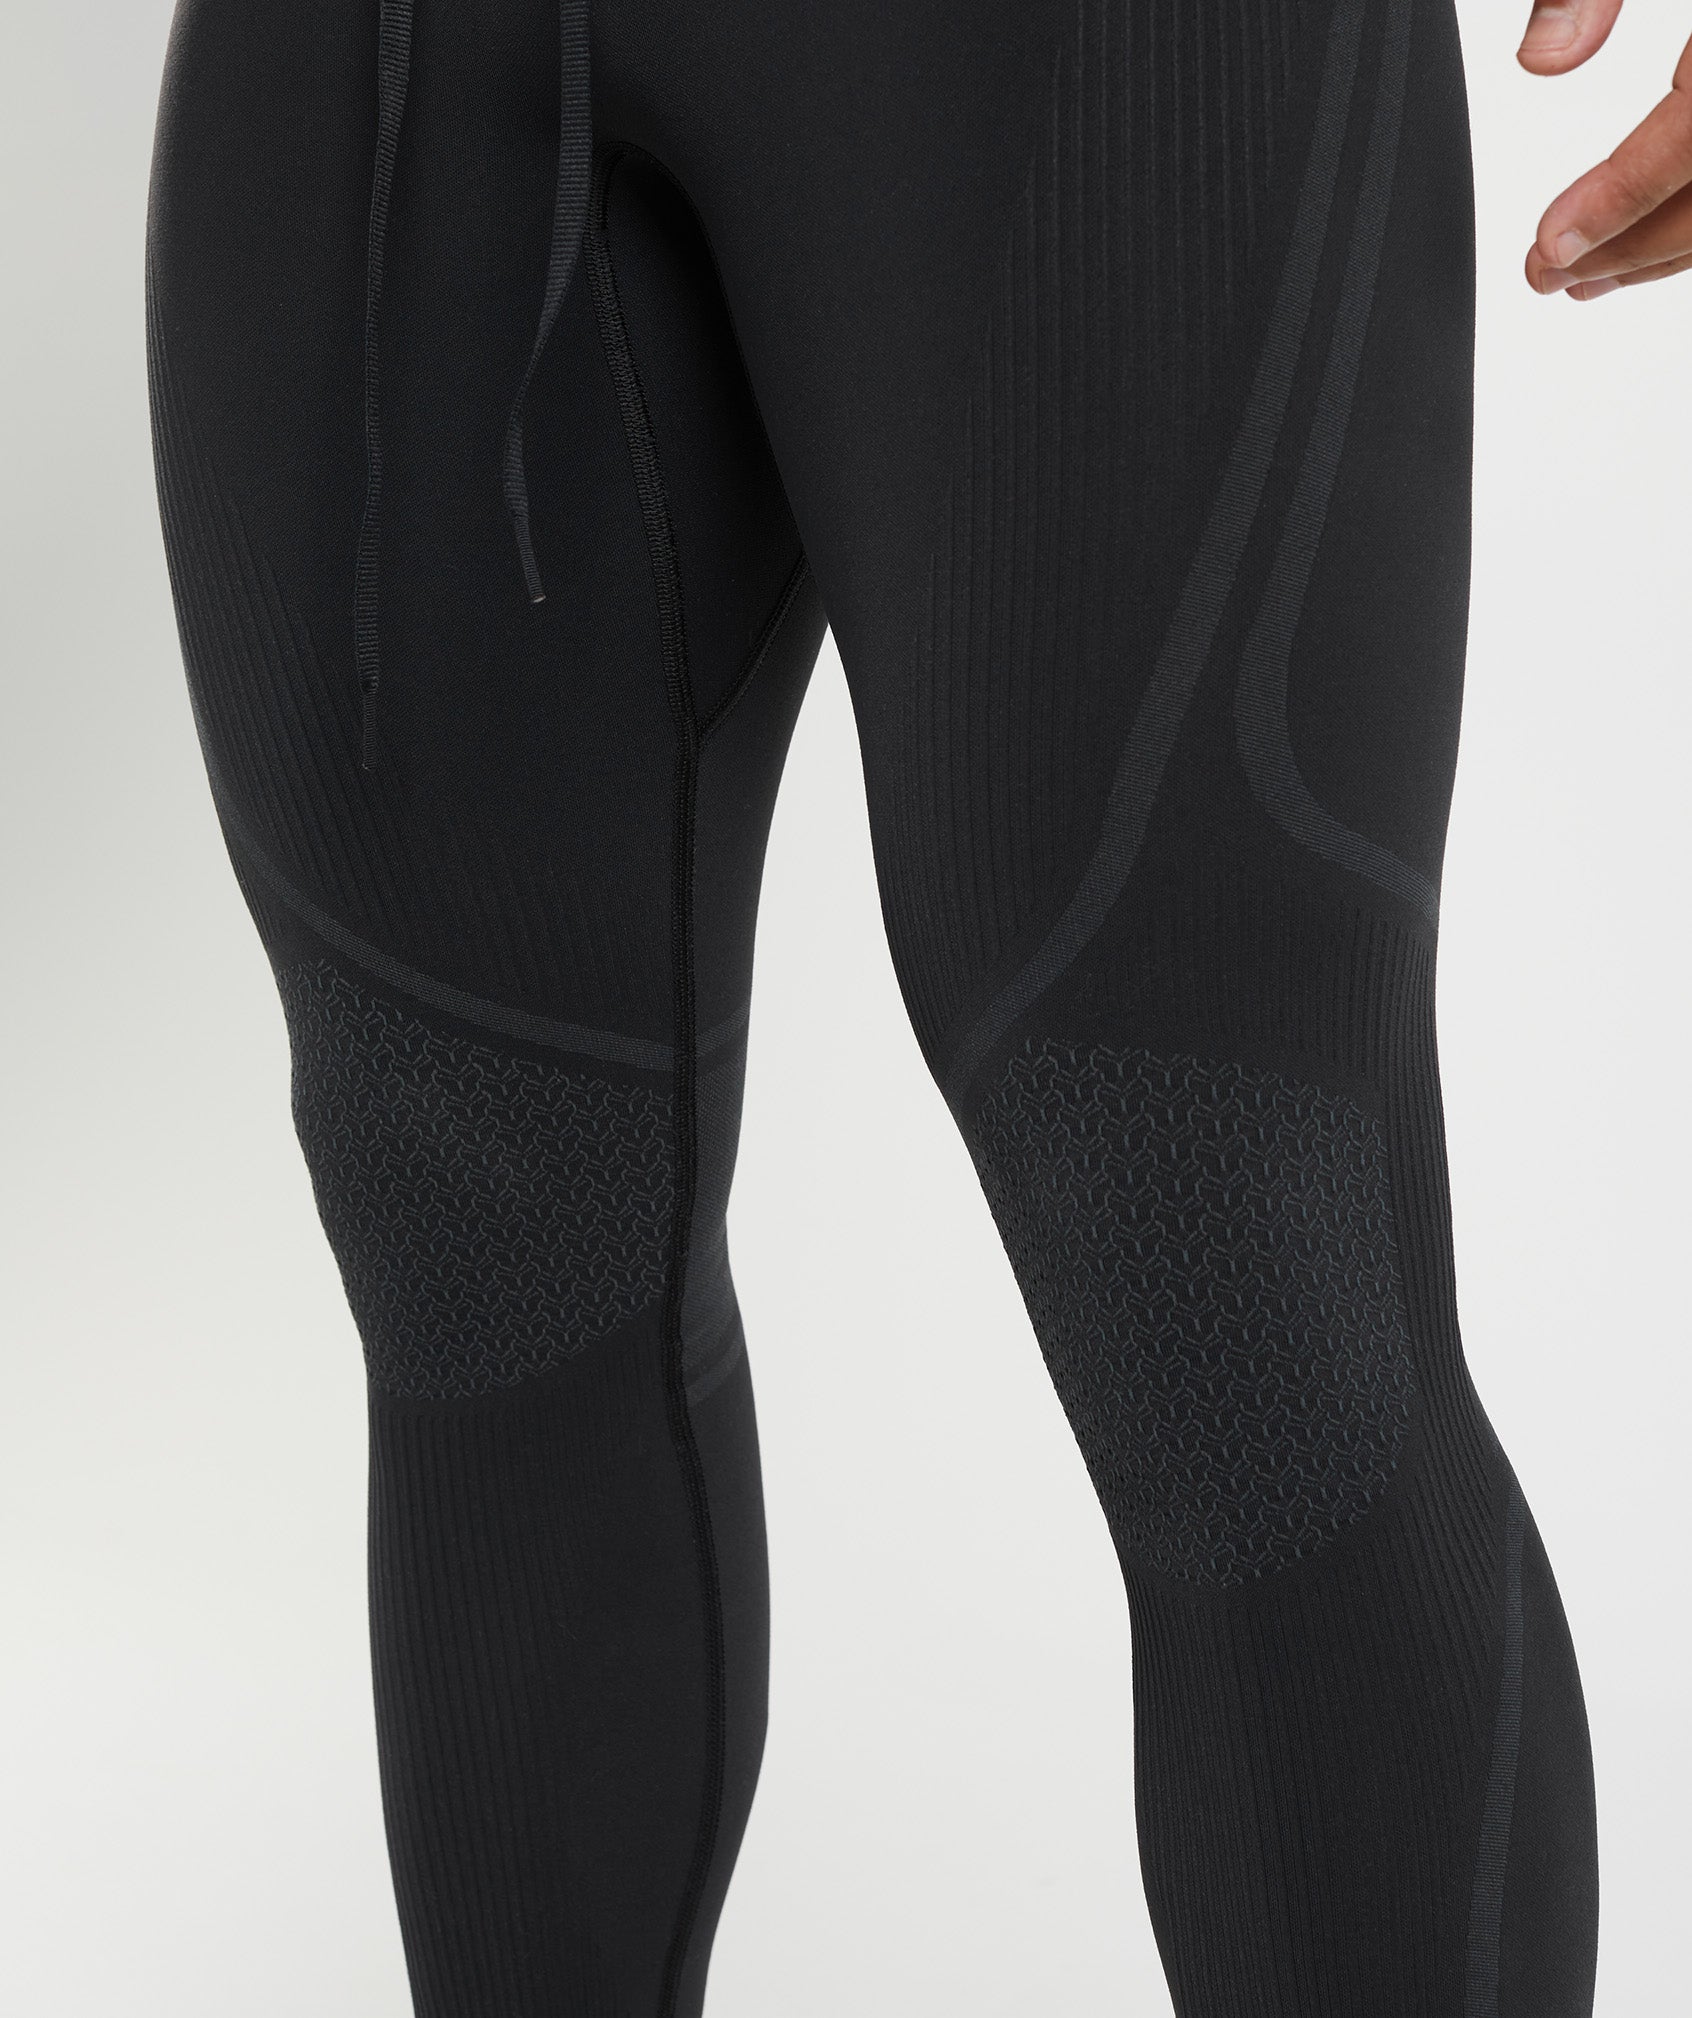 315 Seamless Tights in Black/Charcoal Grey